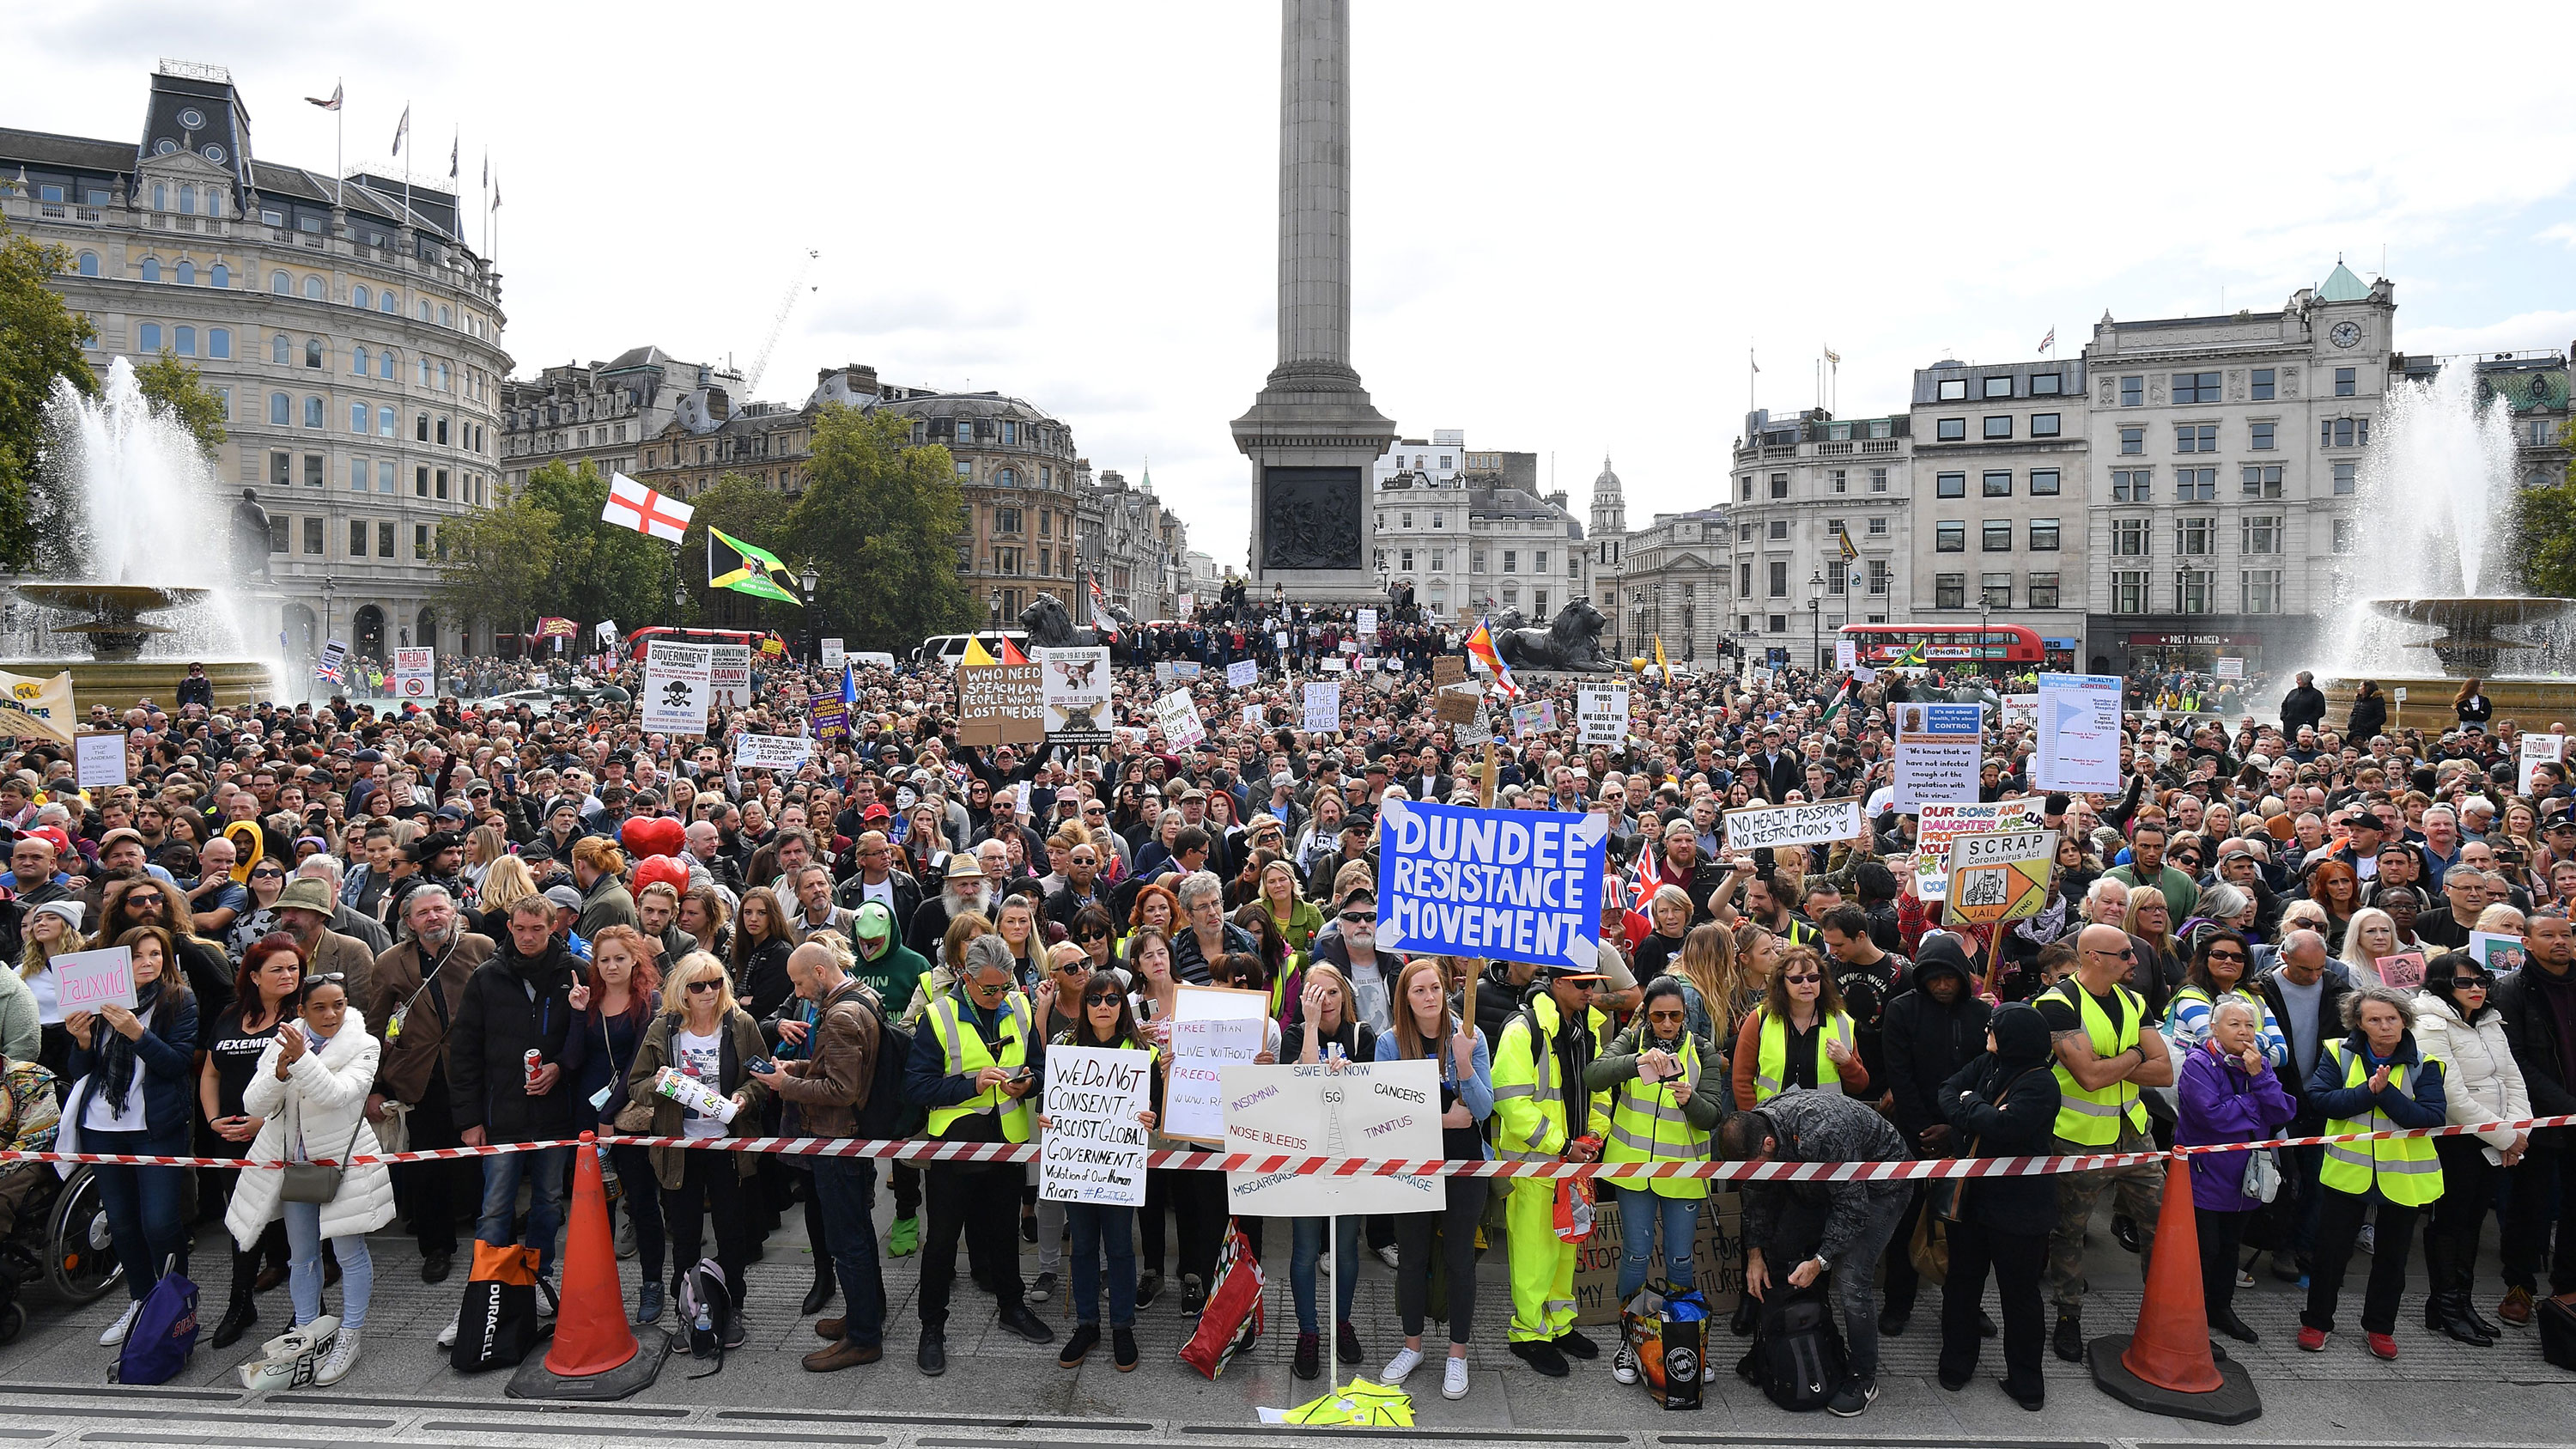 Protesters gather in Trafalgar Square for a rally against vaccination and government restrictions designed to fight the spread of the novel coronavirus, in London on September 26.